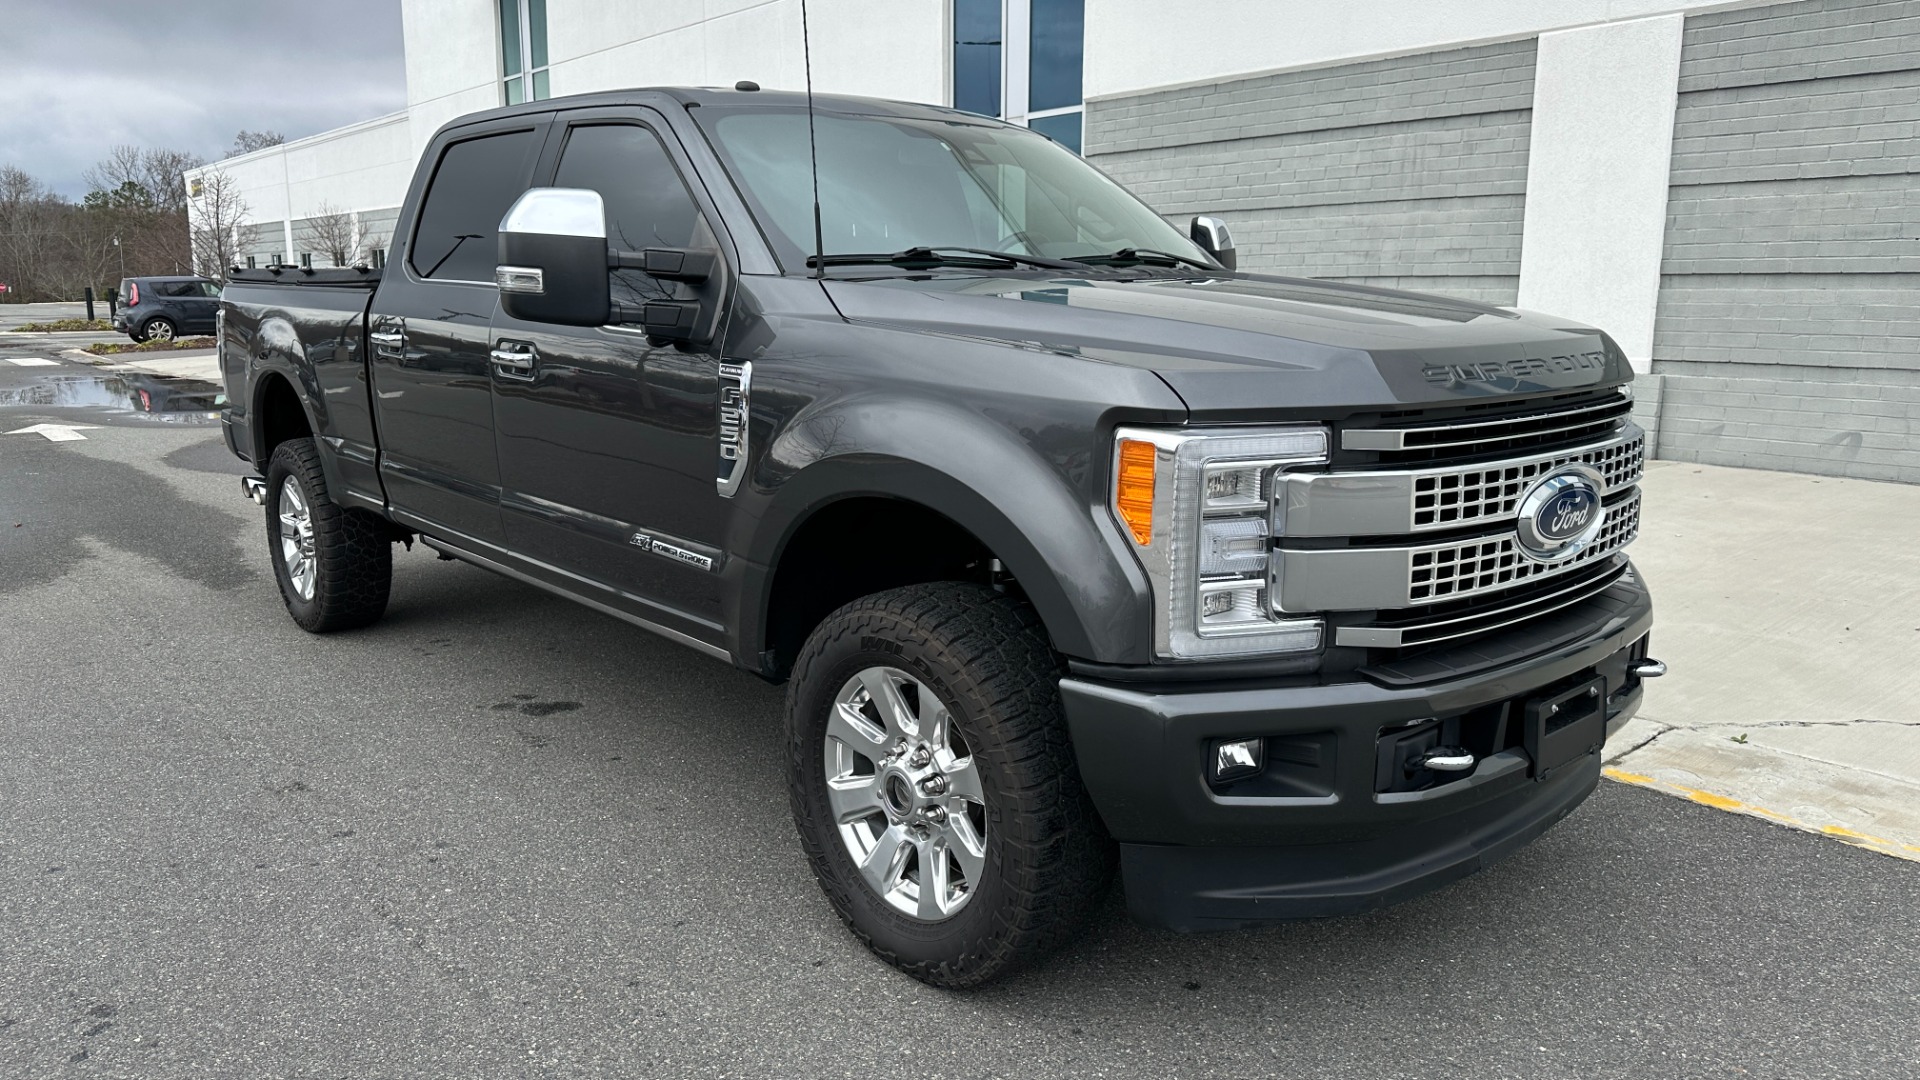 Used 2017 Ford Super Duty F-250 SRW PLATINUM / FOX SHOCKS / 6.7 DIESEL / FX4 OFFROAD / ADAPTIVE CRUISE for sale $54,995 at Formula Imports in Charlotte NC 28227 2